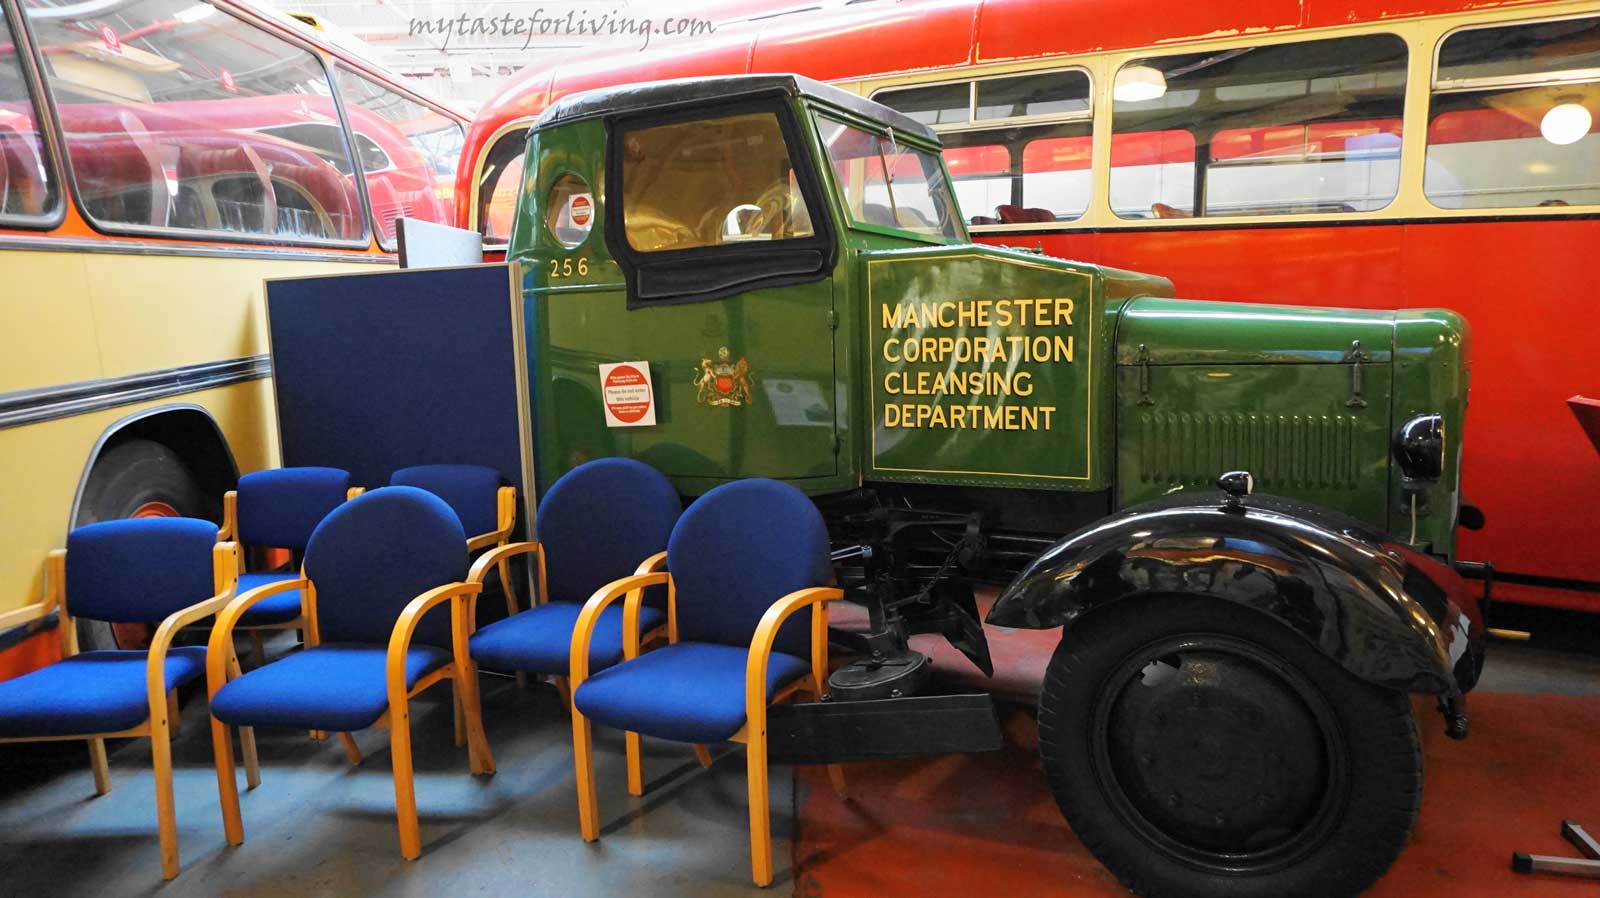 The Museum of Transport in the city of Manchester, England, was opened in 1979 years. Its collected over 100 years of the history of public road transport in the city.